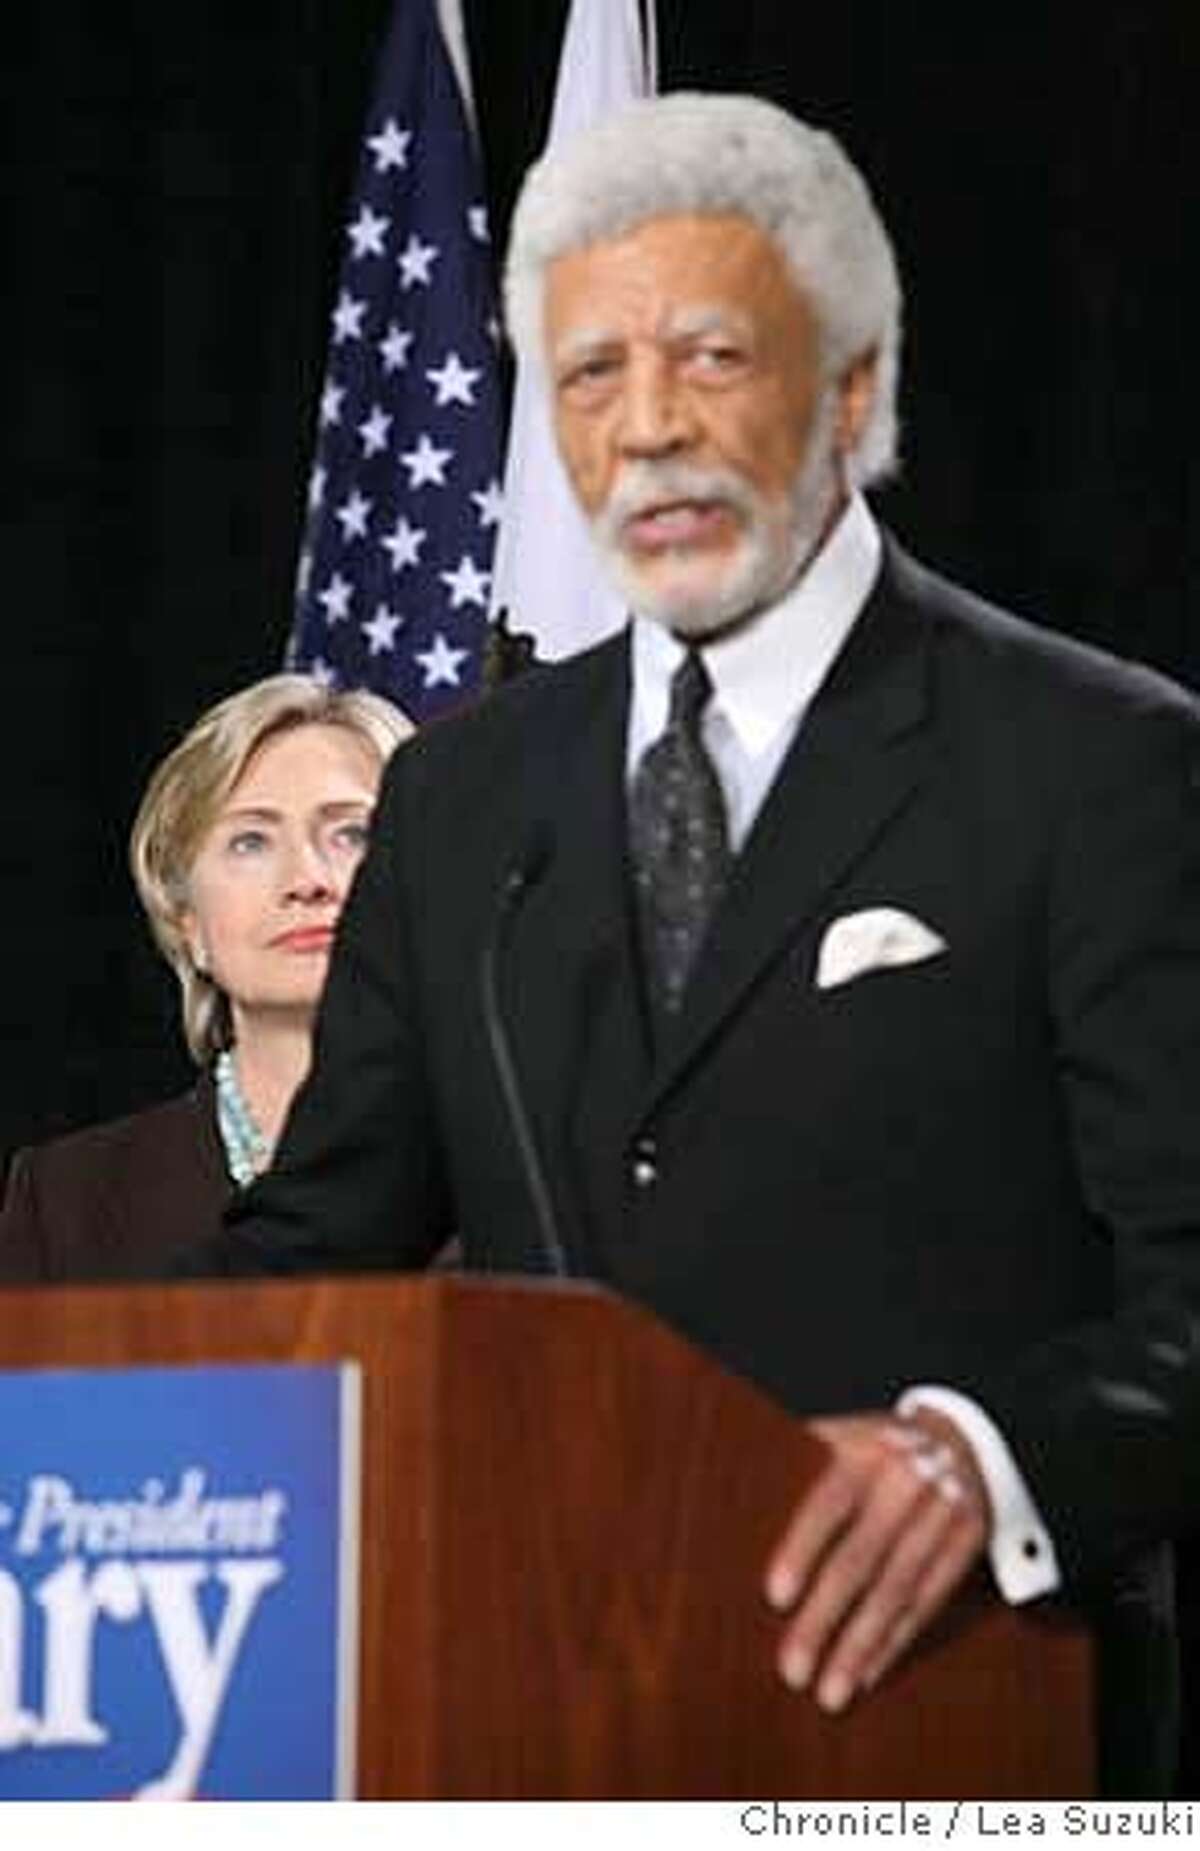 Mayor Ron Dellums(foreground) endorses Hillary Clinton (behind left) during an appearance at Laney College. Hillary Clinton tours a culinary class and is endorsed by Mayor Ron Dellums at Laney College during an appearance at the Student Center. Lea Suzuki / The Chronicle Photo taken on 10/1/07, in Oakland, CA, USA